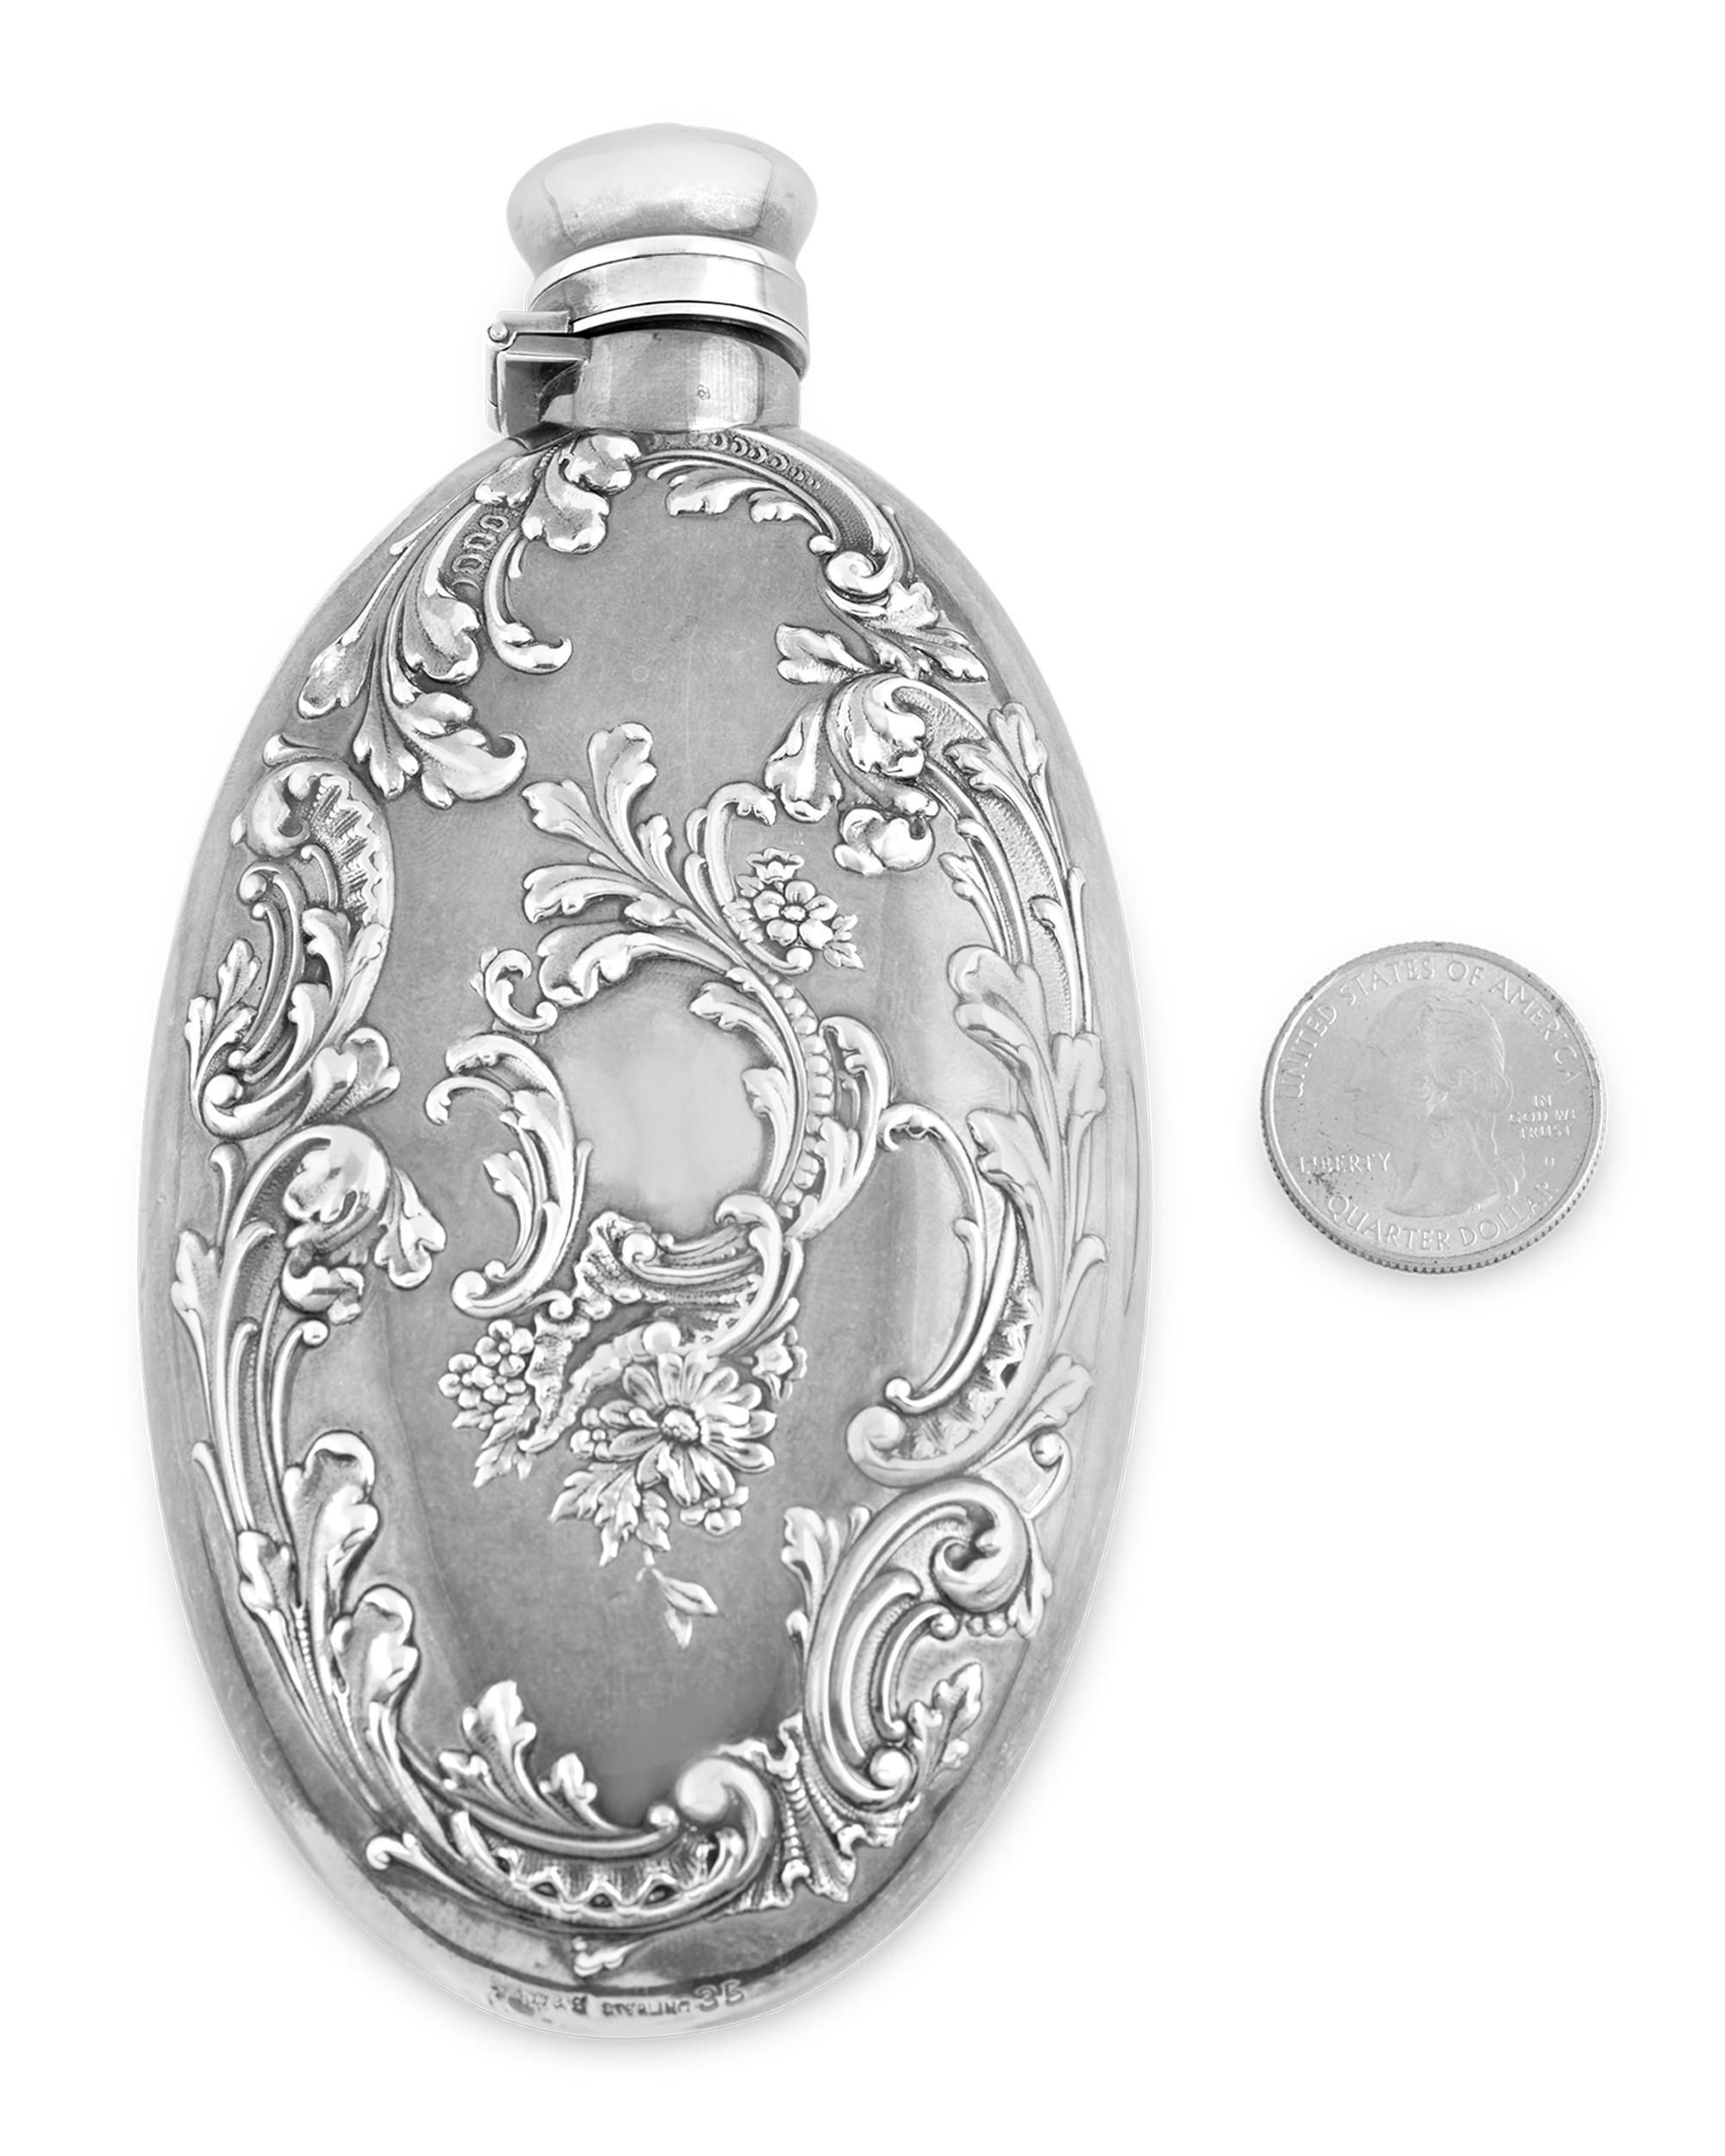 American Silver Flask by R. Wallace & Sons